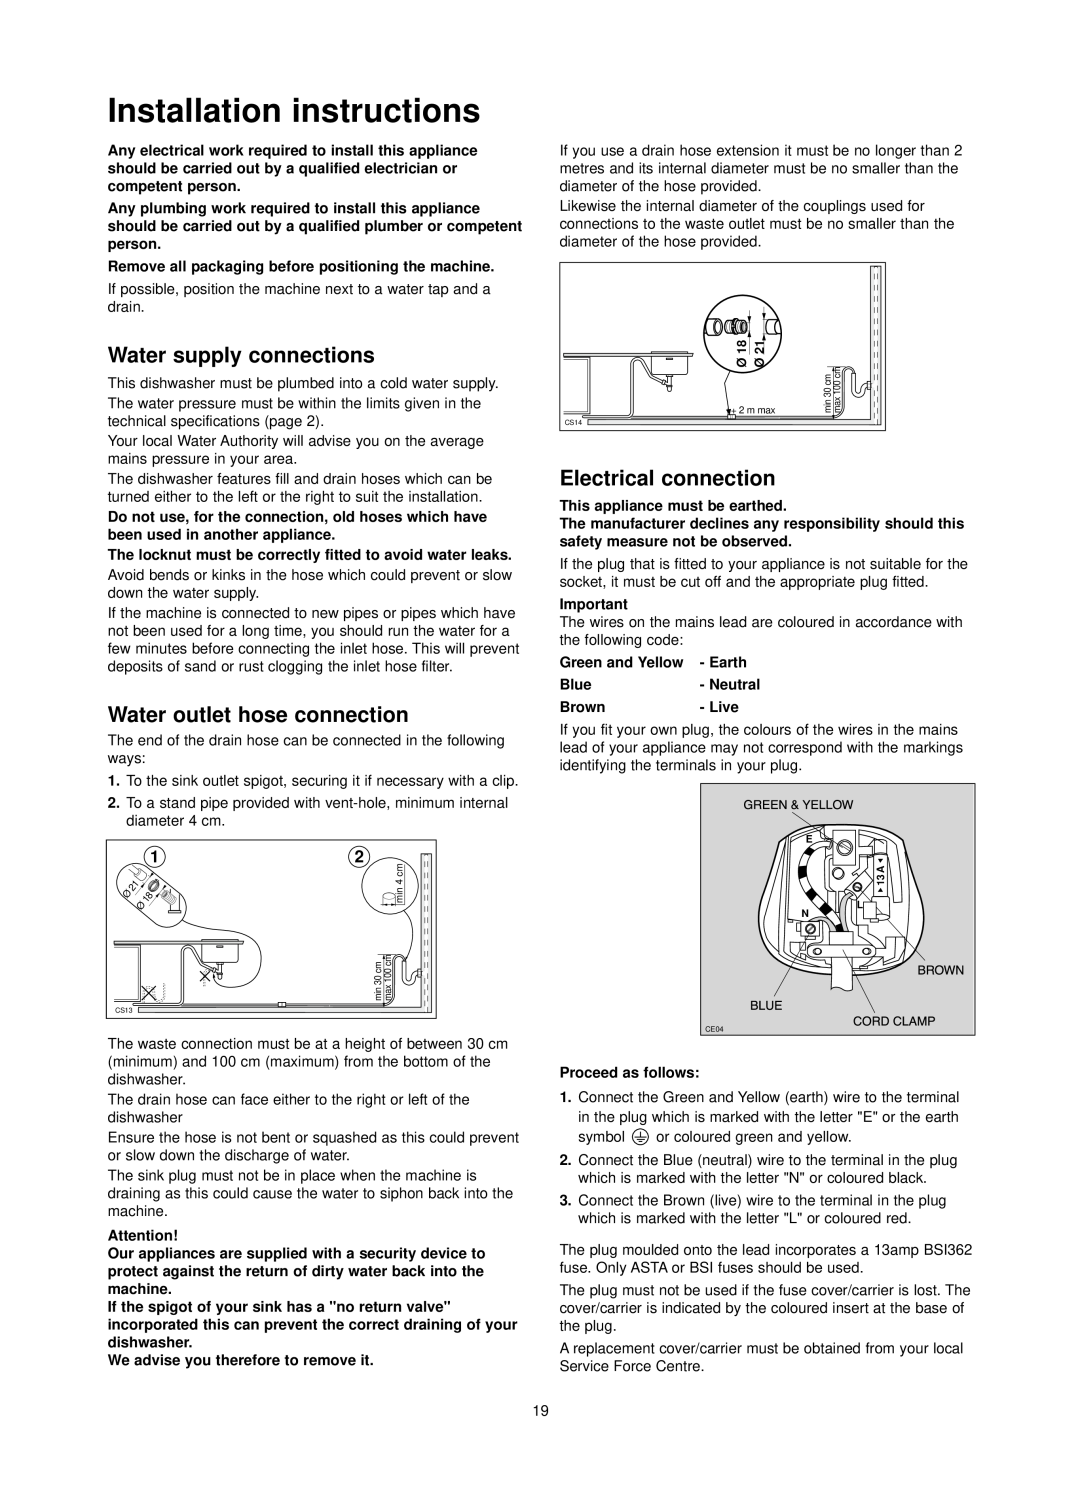 Zanussi ZDI 6895 SX manual Installation instructions, Water supply connections, Water outlet hose connection, Brown 